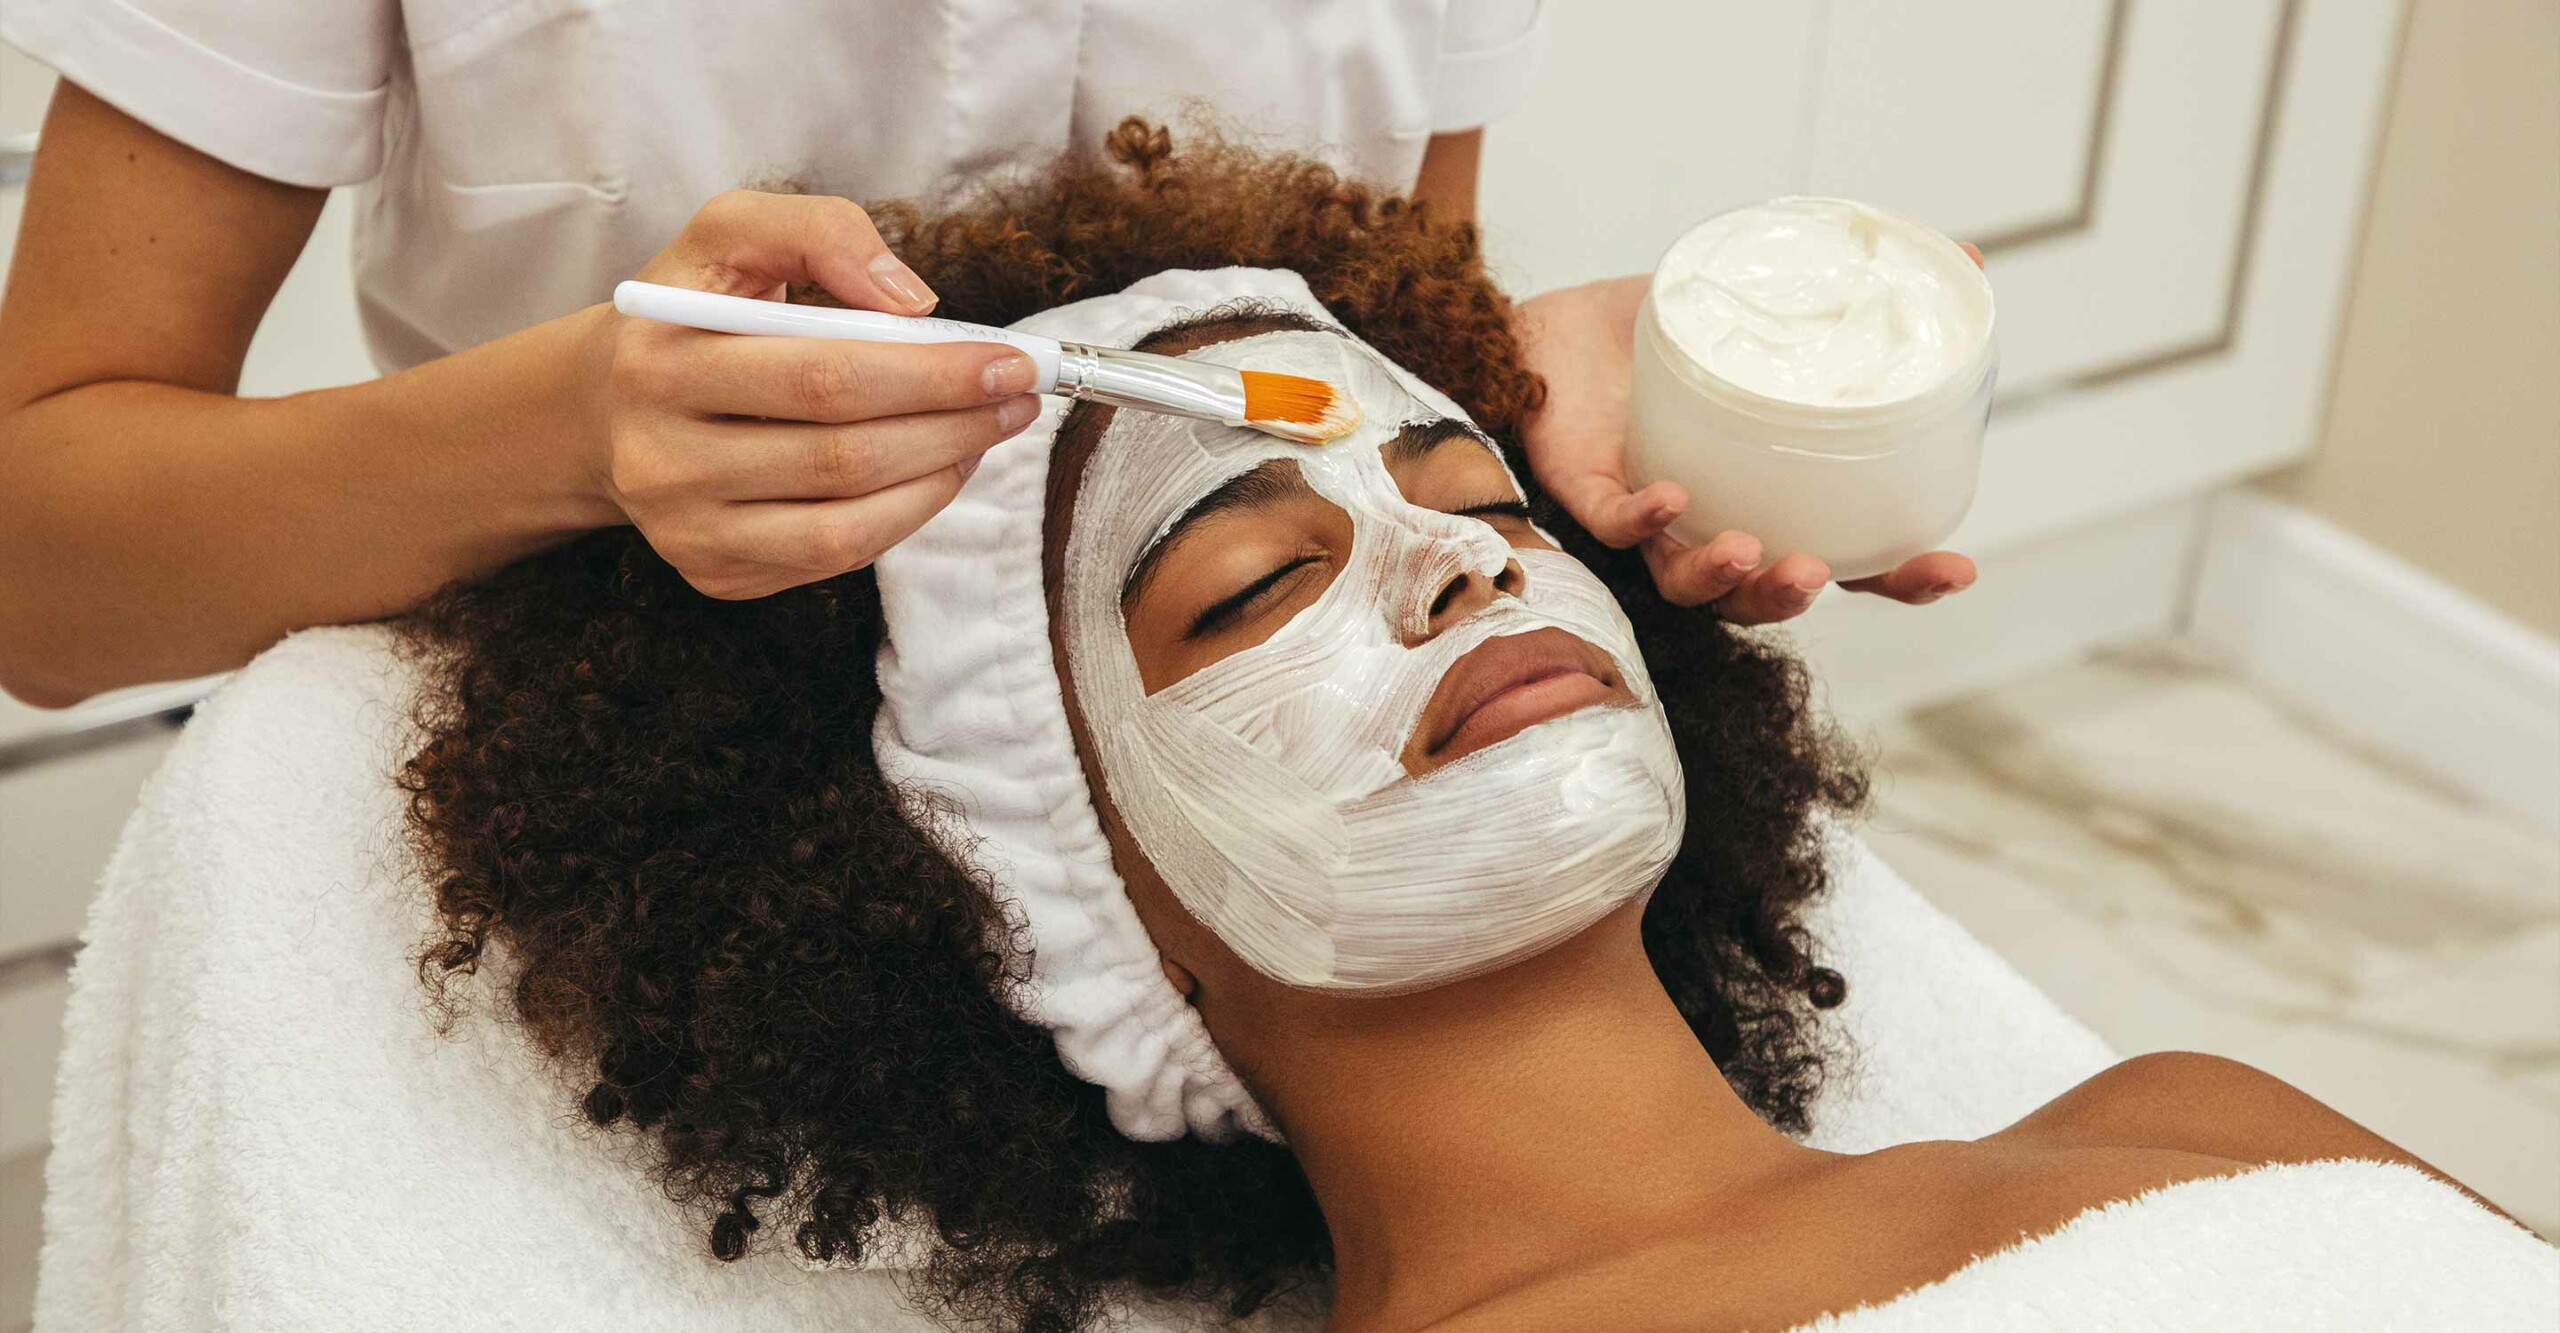 How Much Is a Facial? - StyleSeat